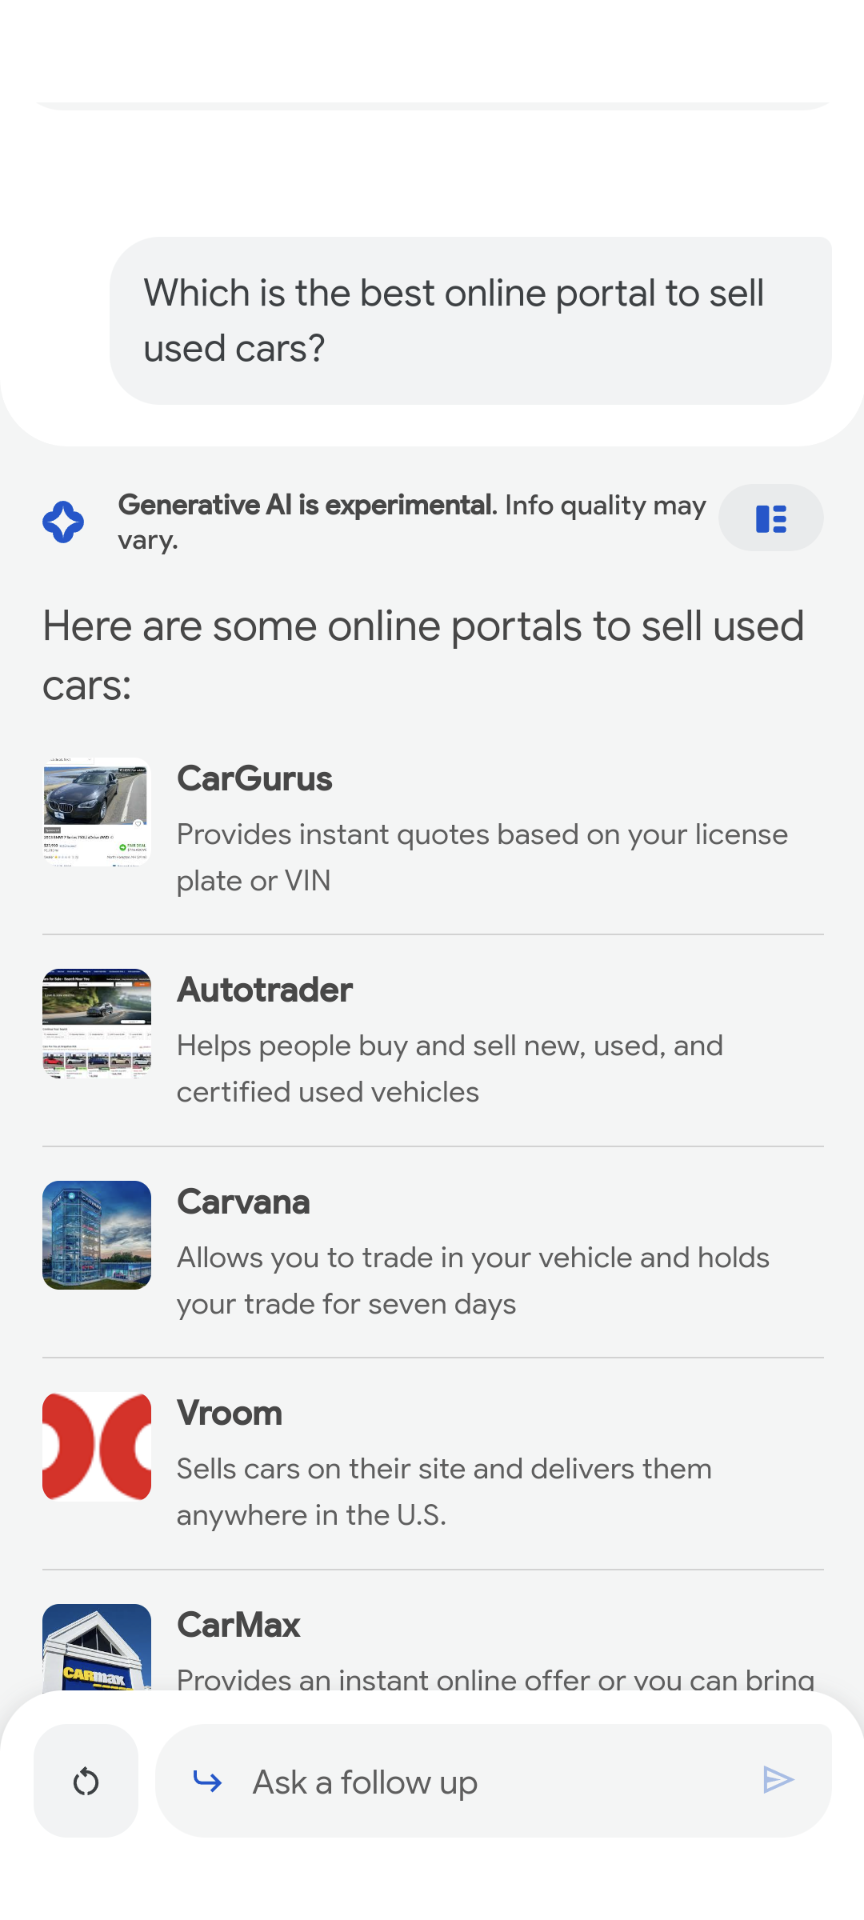 in Converse mode of Google's search generative experience, a follow up question from 'sell my car online' was asked of 'what is the best online portal to sell used cars' which returned a list of sites with the site name, a brief description of what it offers, and an image of the site's homepage or logo next to it.